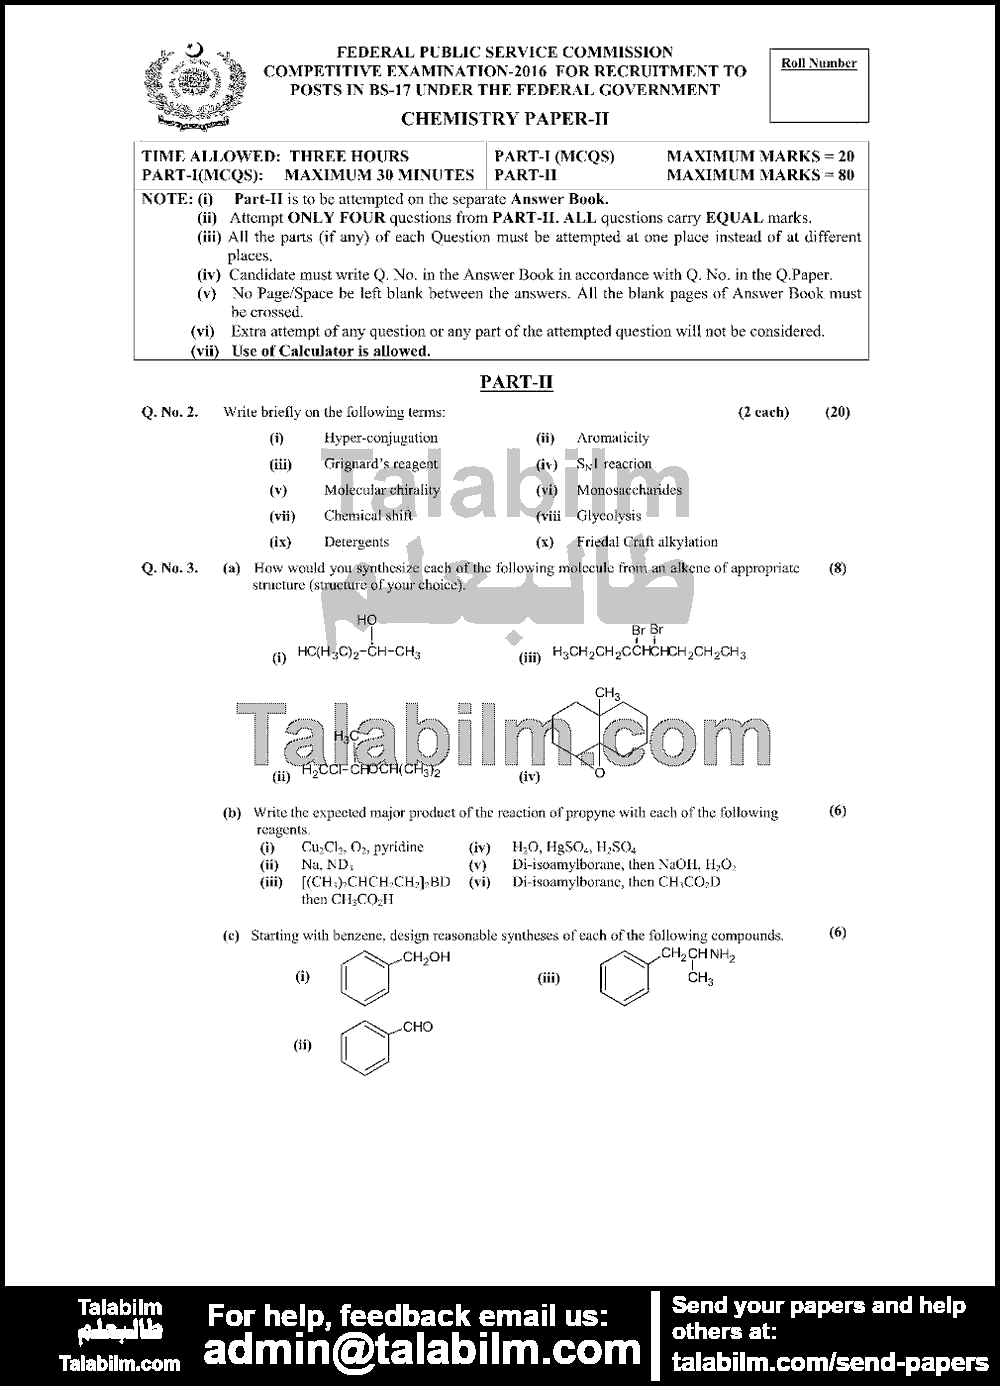 Chemistry 0 past paper for 2016 Page No. 2